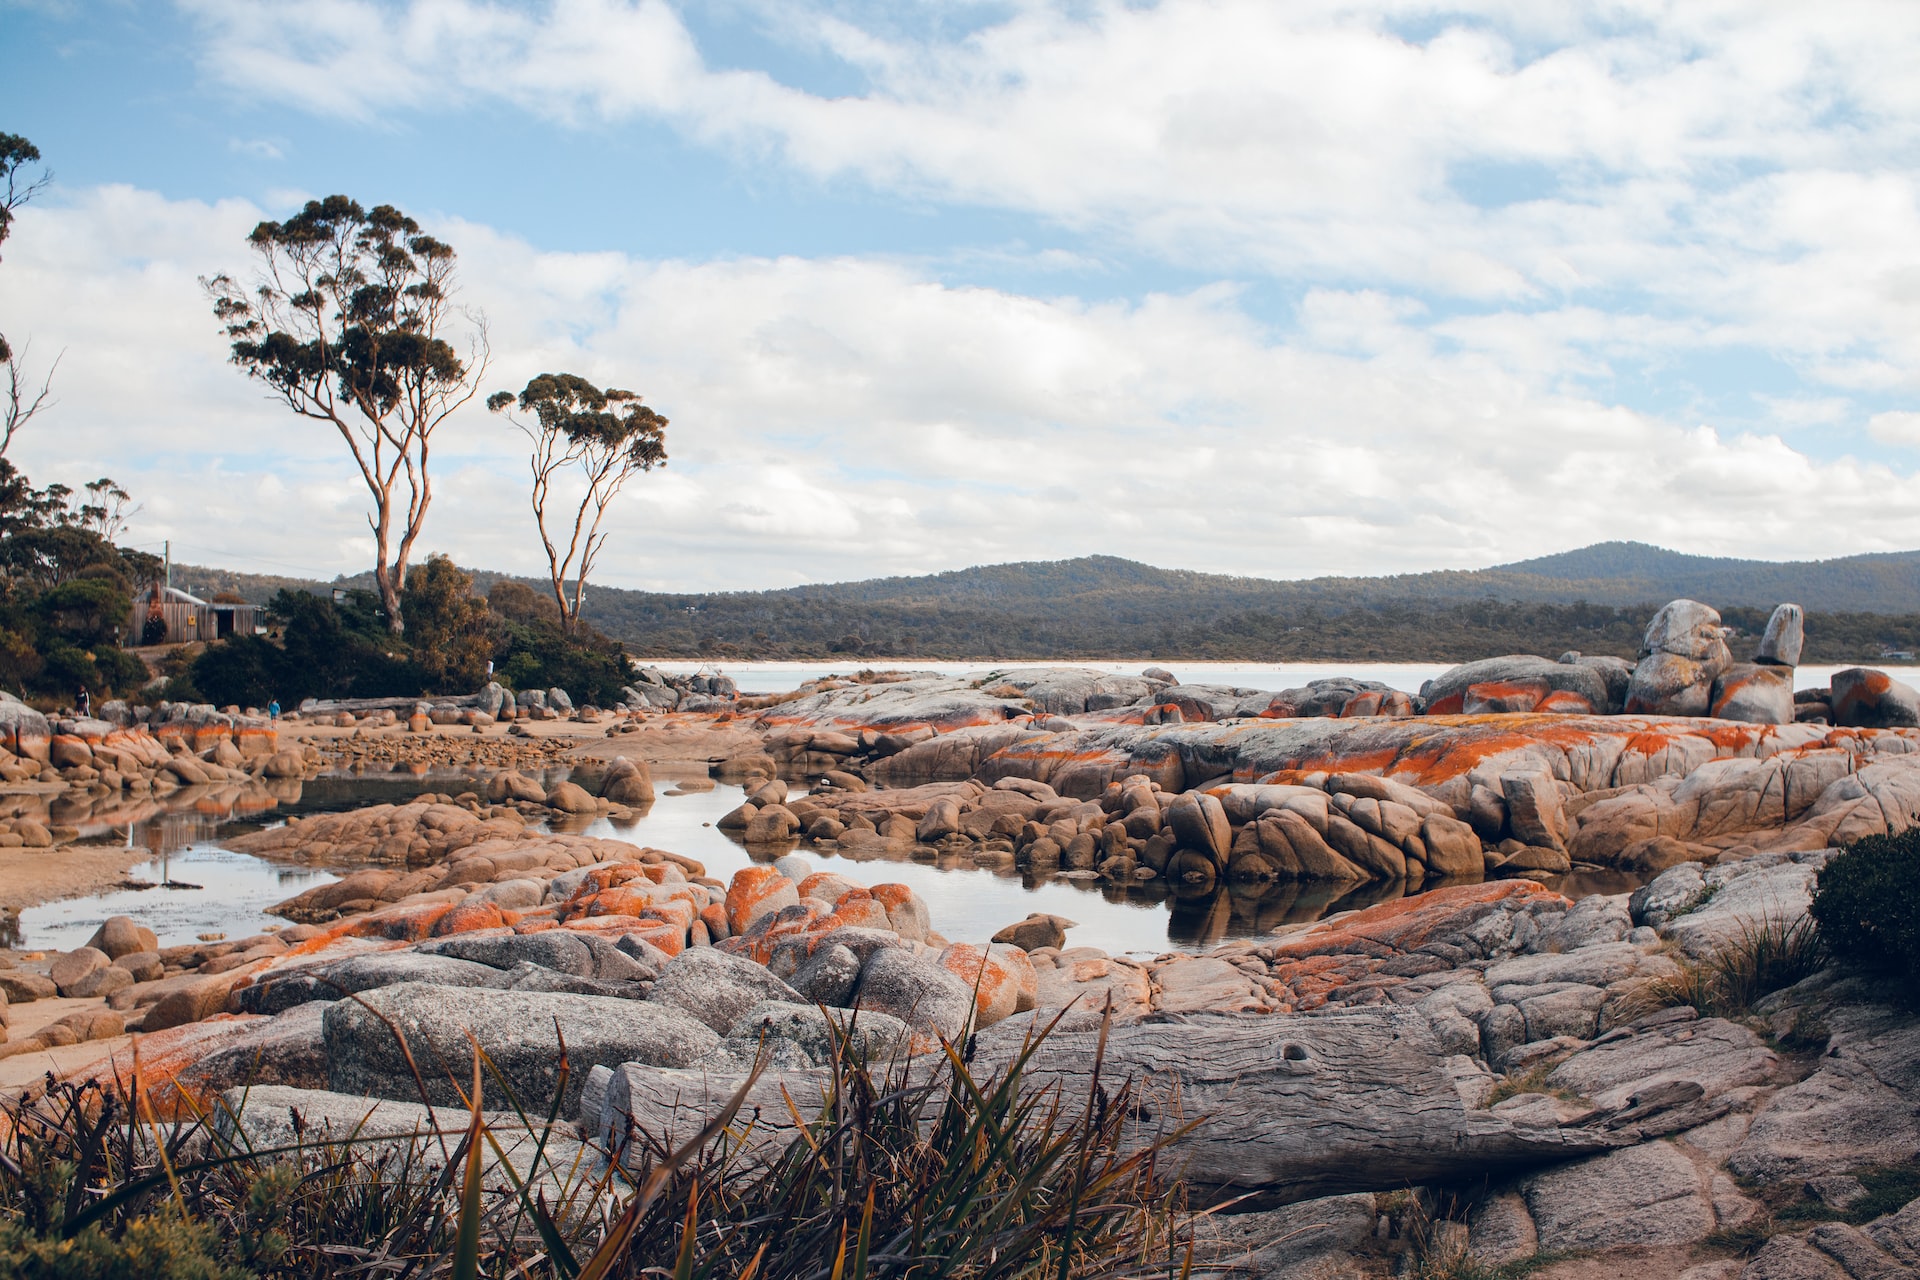 The Bucket List: Top 10 Things You Need To Do When Visiting Tasmania